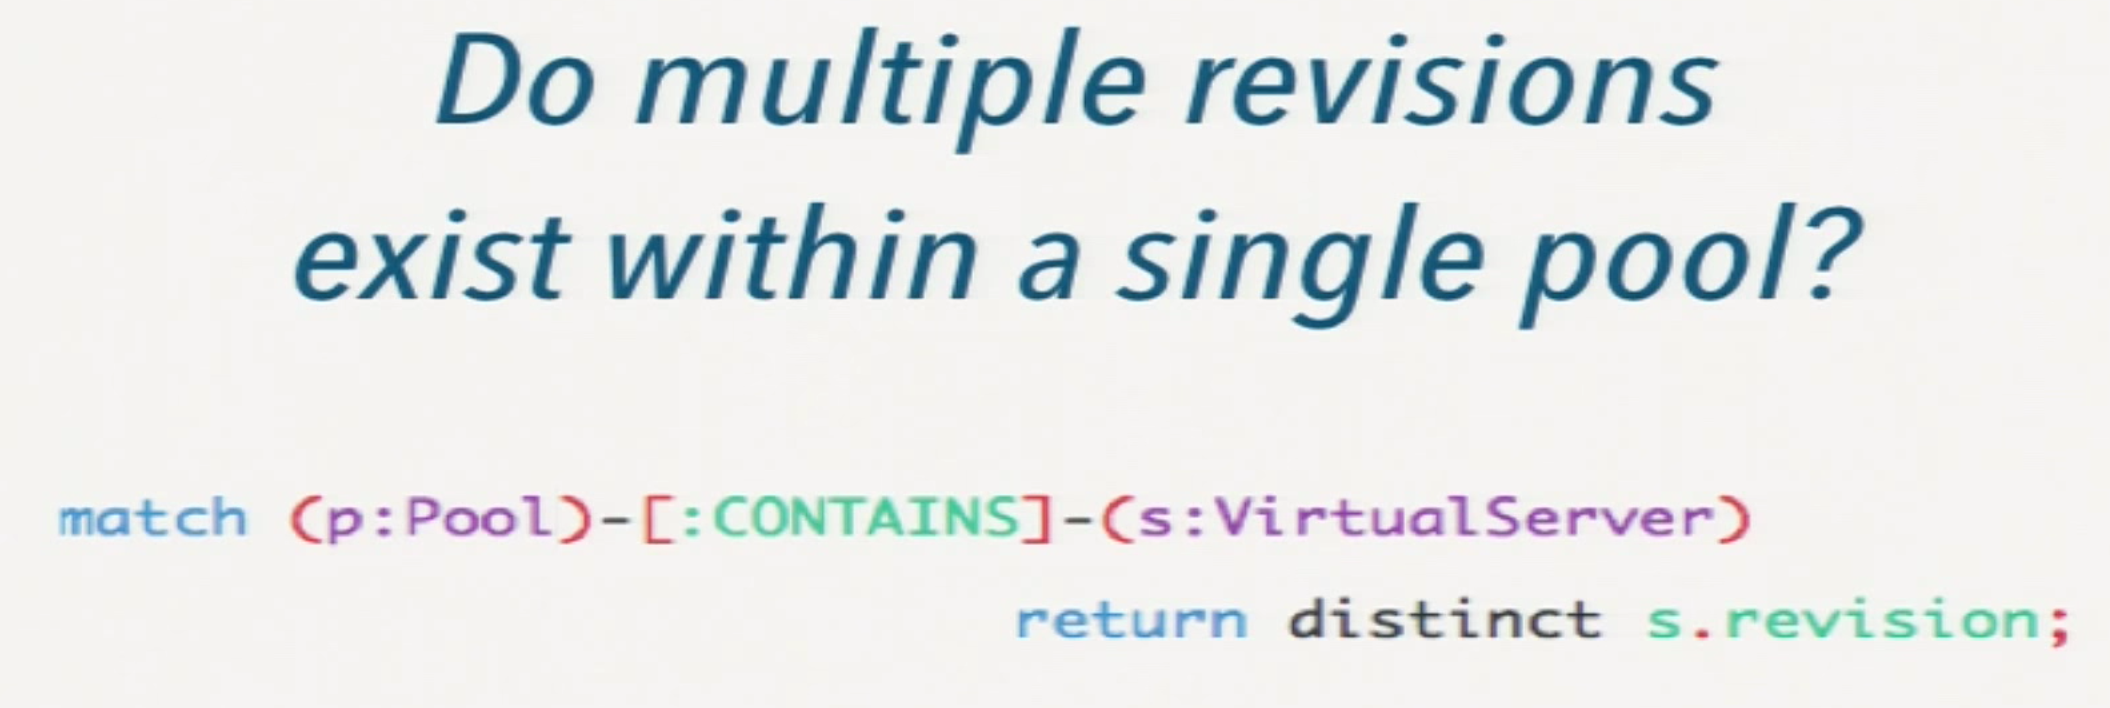 a cypher query to determine if multiple revisions exist within a single pool